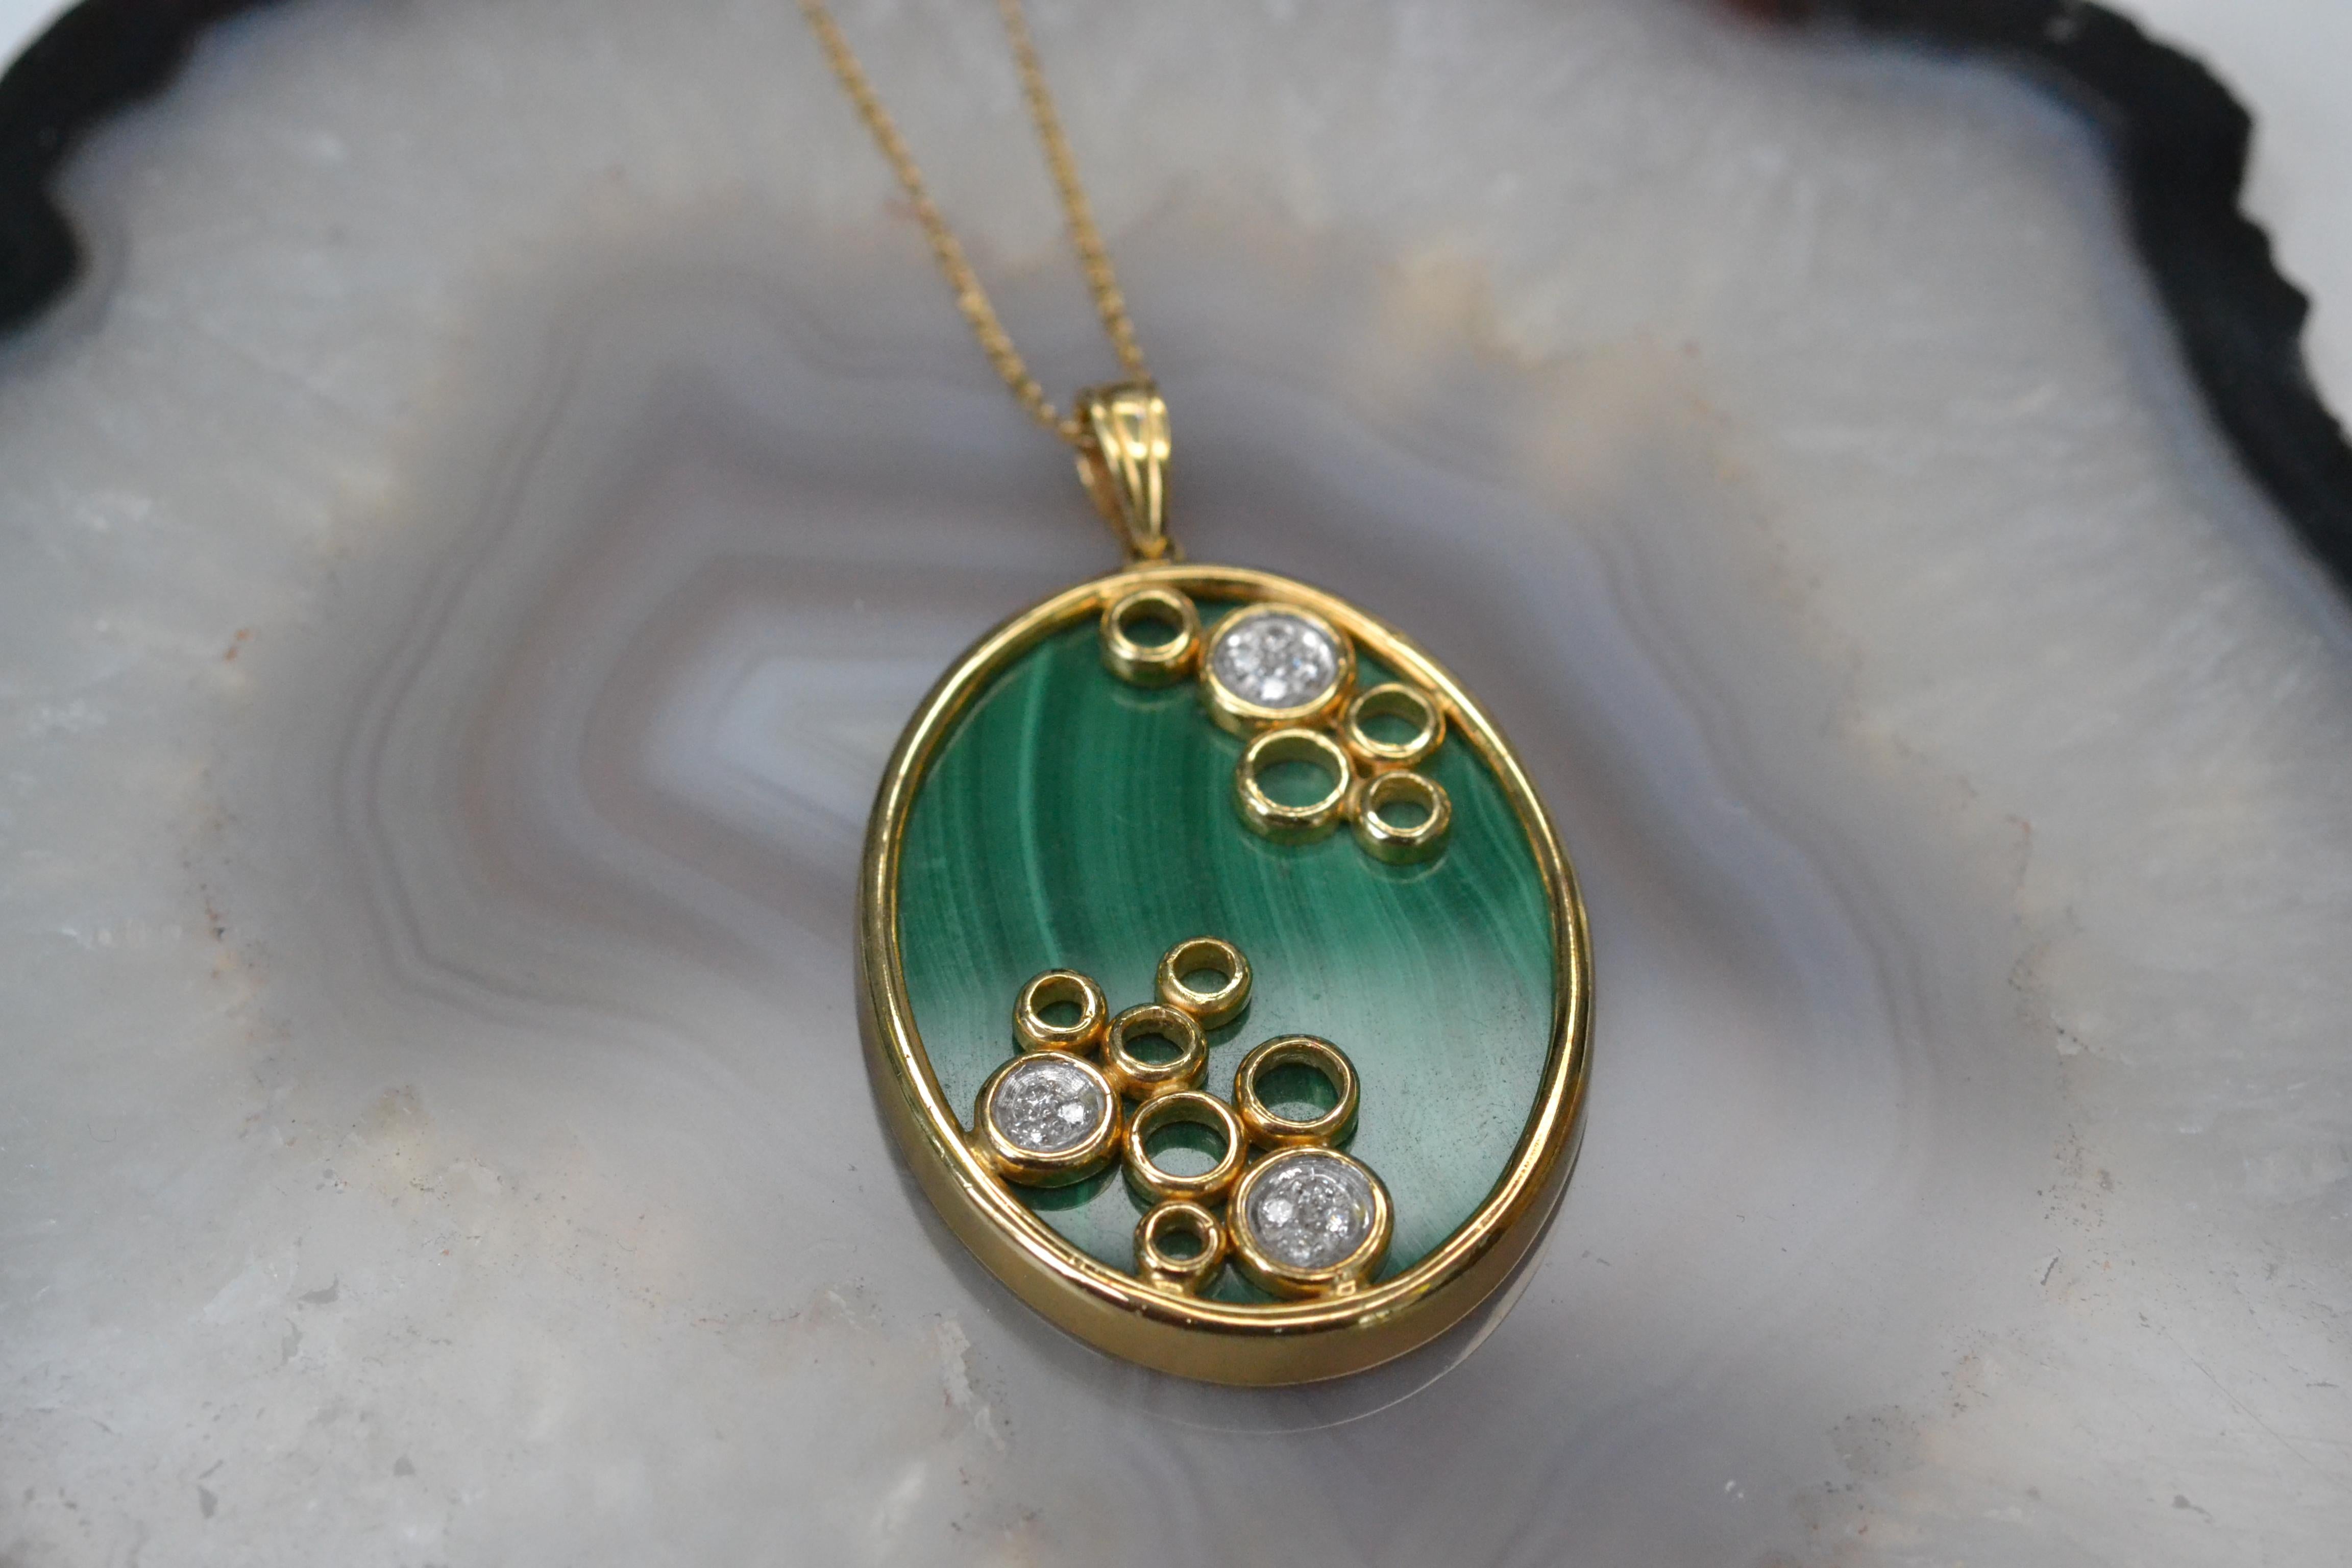 Vintage 14k Gold Malachite and Diamond Pendant

This unique malachite pendant made in the 1980s is the perfect statement necklace: bright, bold and sparkly. The three clusters of white diamonds add an extra dazzle to this eye-catching piece and this